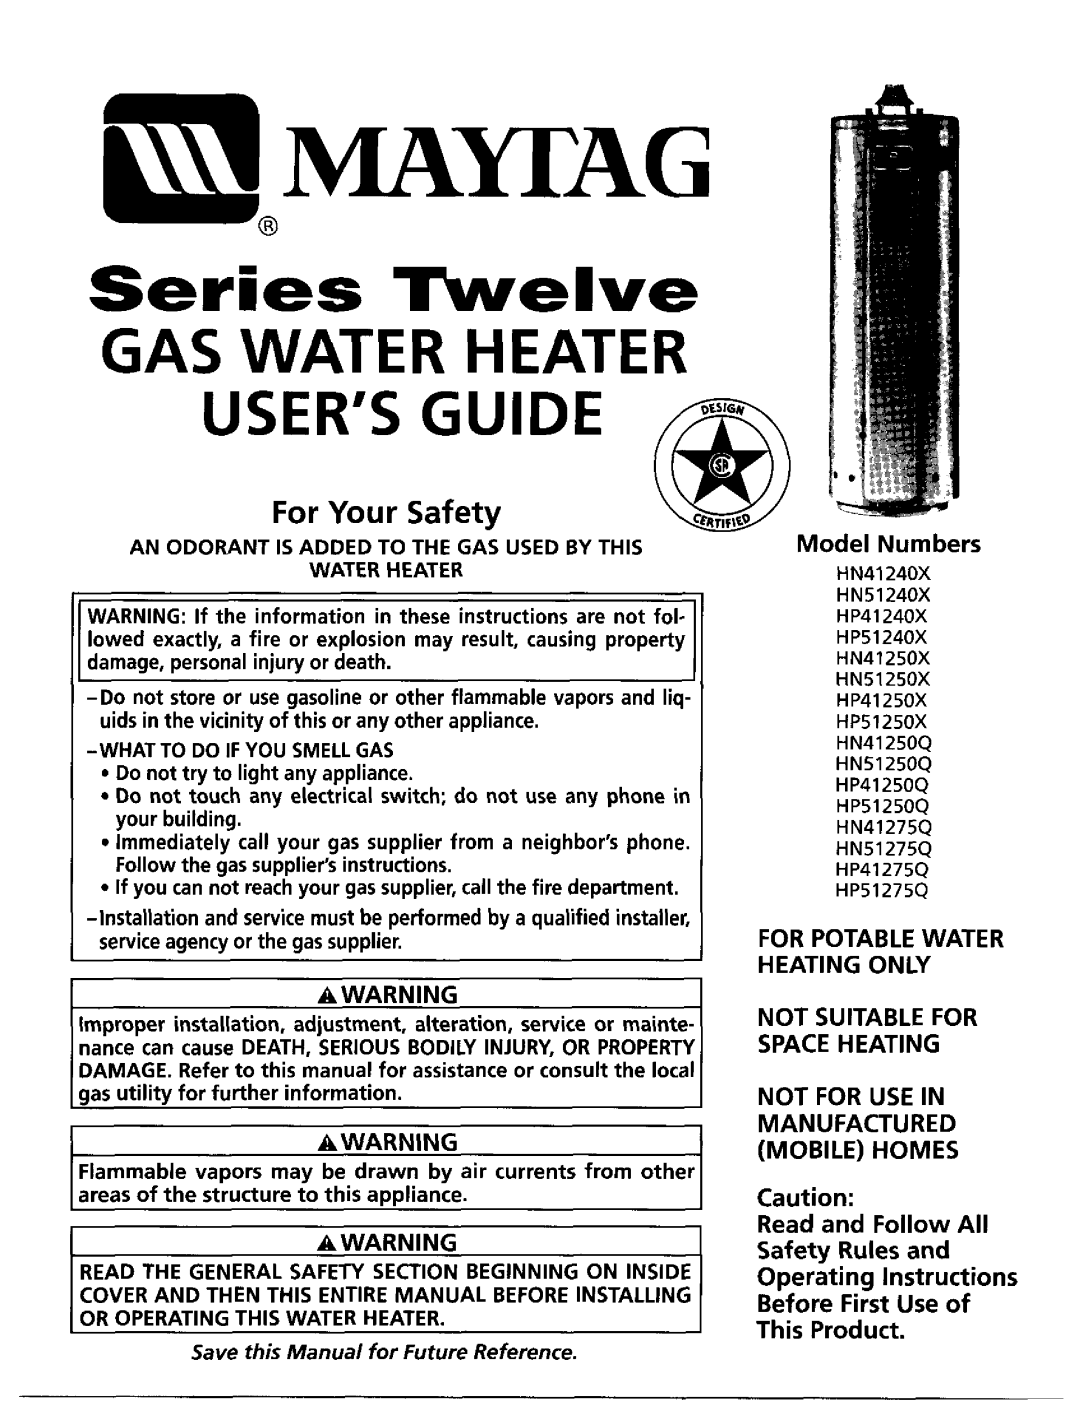 Maytag HN41240X manual Heatingonly, Awarning, A,Warning, MOBILEHOMES Caution MANUFACTURED, This Product, Not Suitablefor 